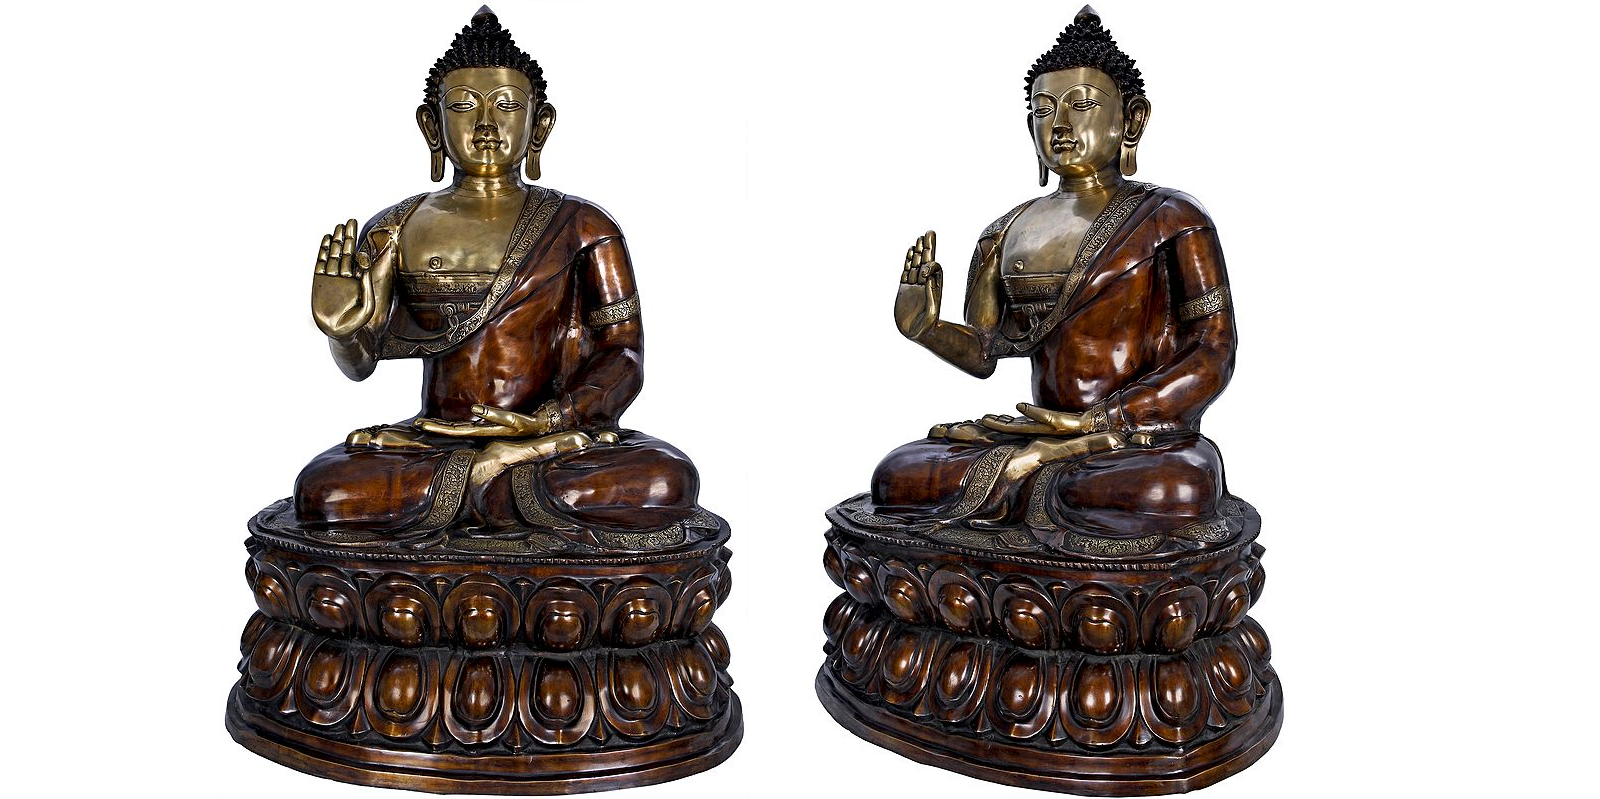 Poses You Can Find in Statues of Buddha for Your Home